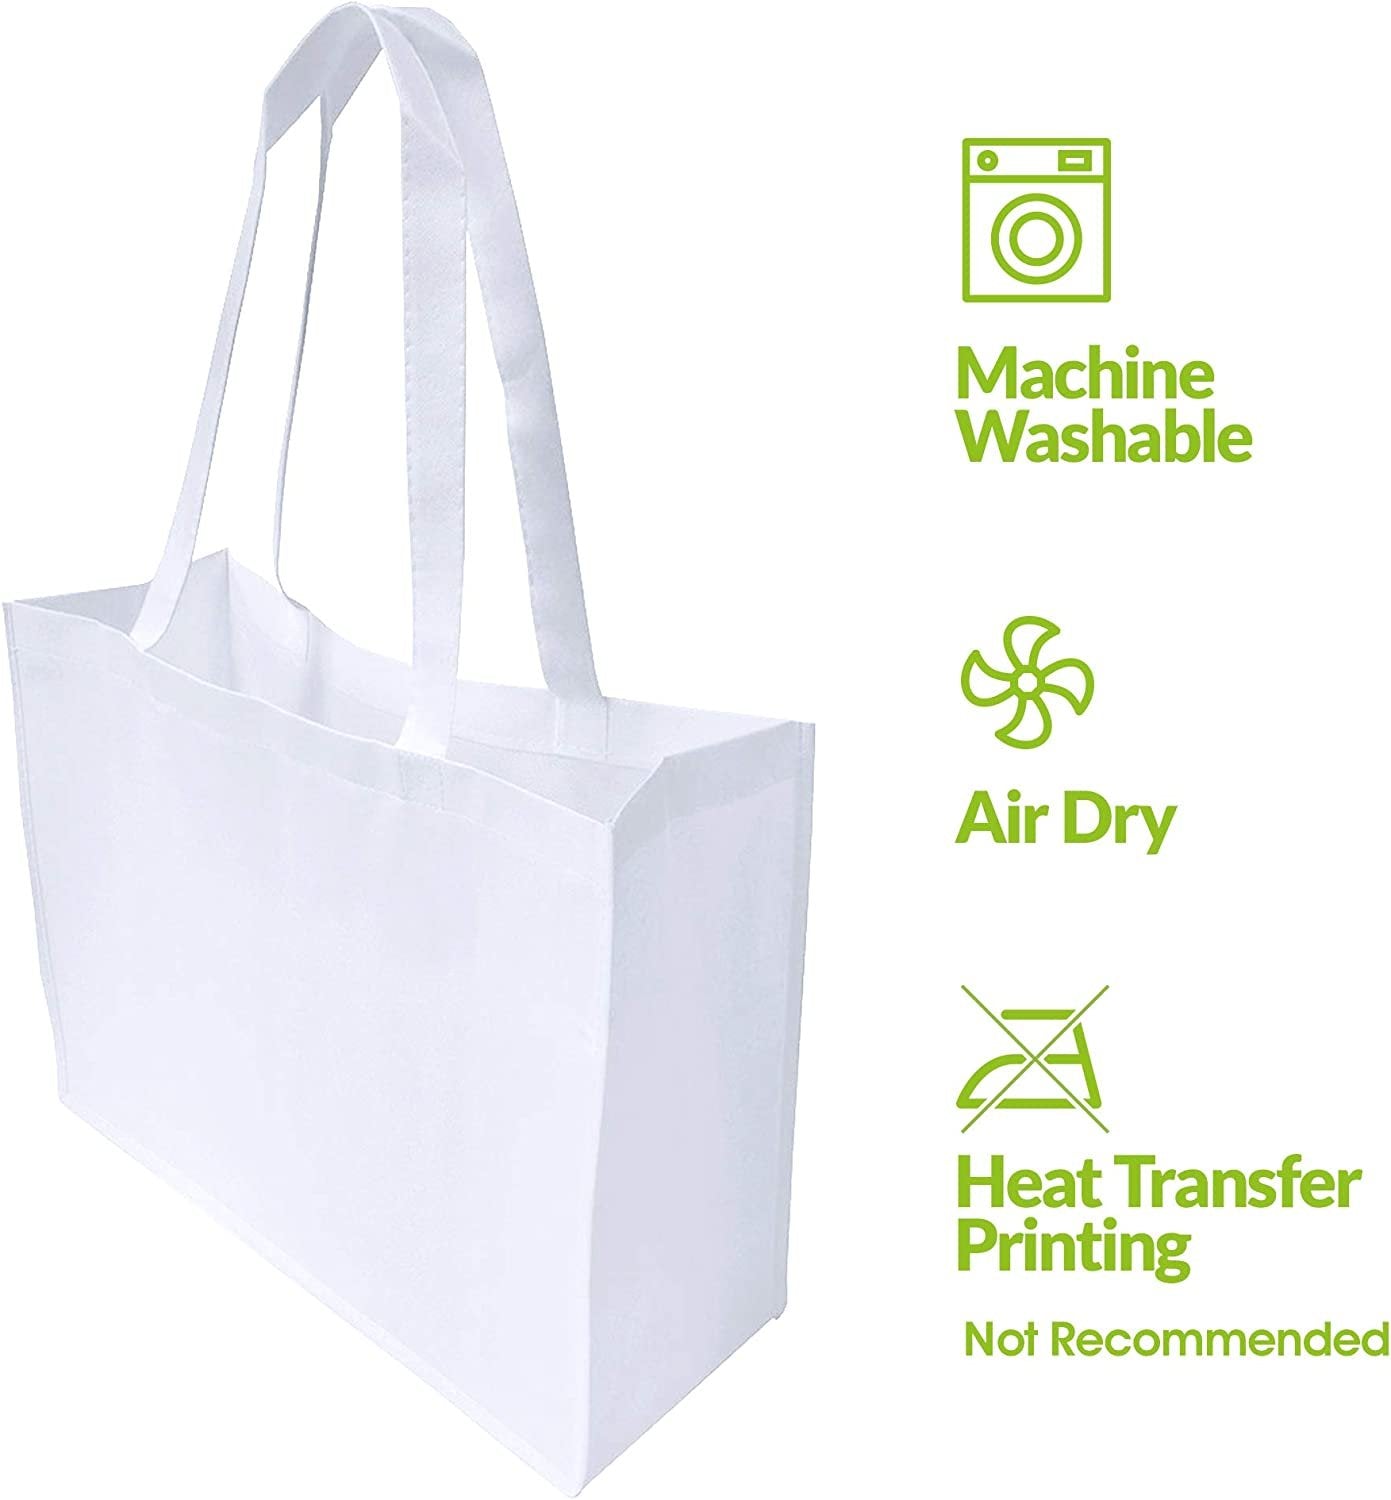 Wedding Gift Bags - 12 Pack Reusable Shopping Bags with Handles, Large White Fabric Cloth Bags for Shopping, Gifts, Groceries, Merchandise, Events, Parties, Take-Out, Retail Stores, Bulk - 16x6x12